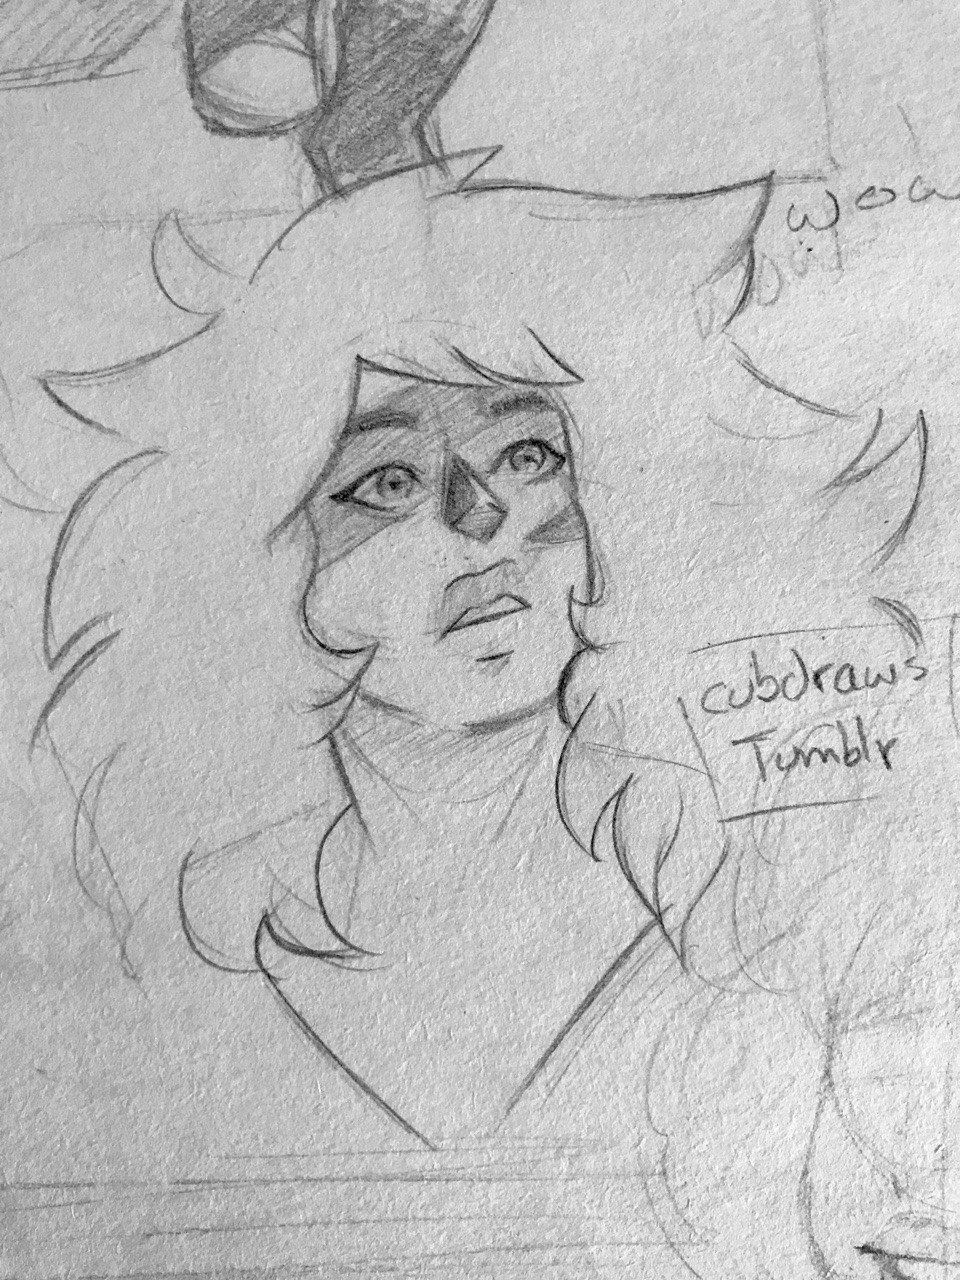 I found an unfinished short comic and I think this is my favorite doodle of jasper I’ve ever made